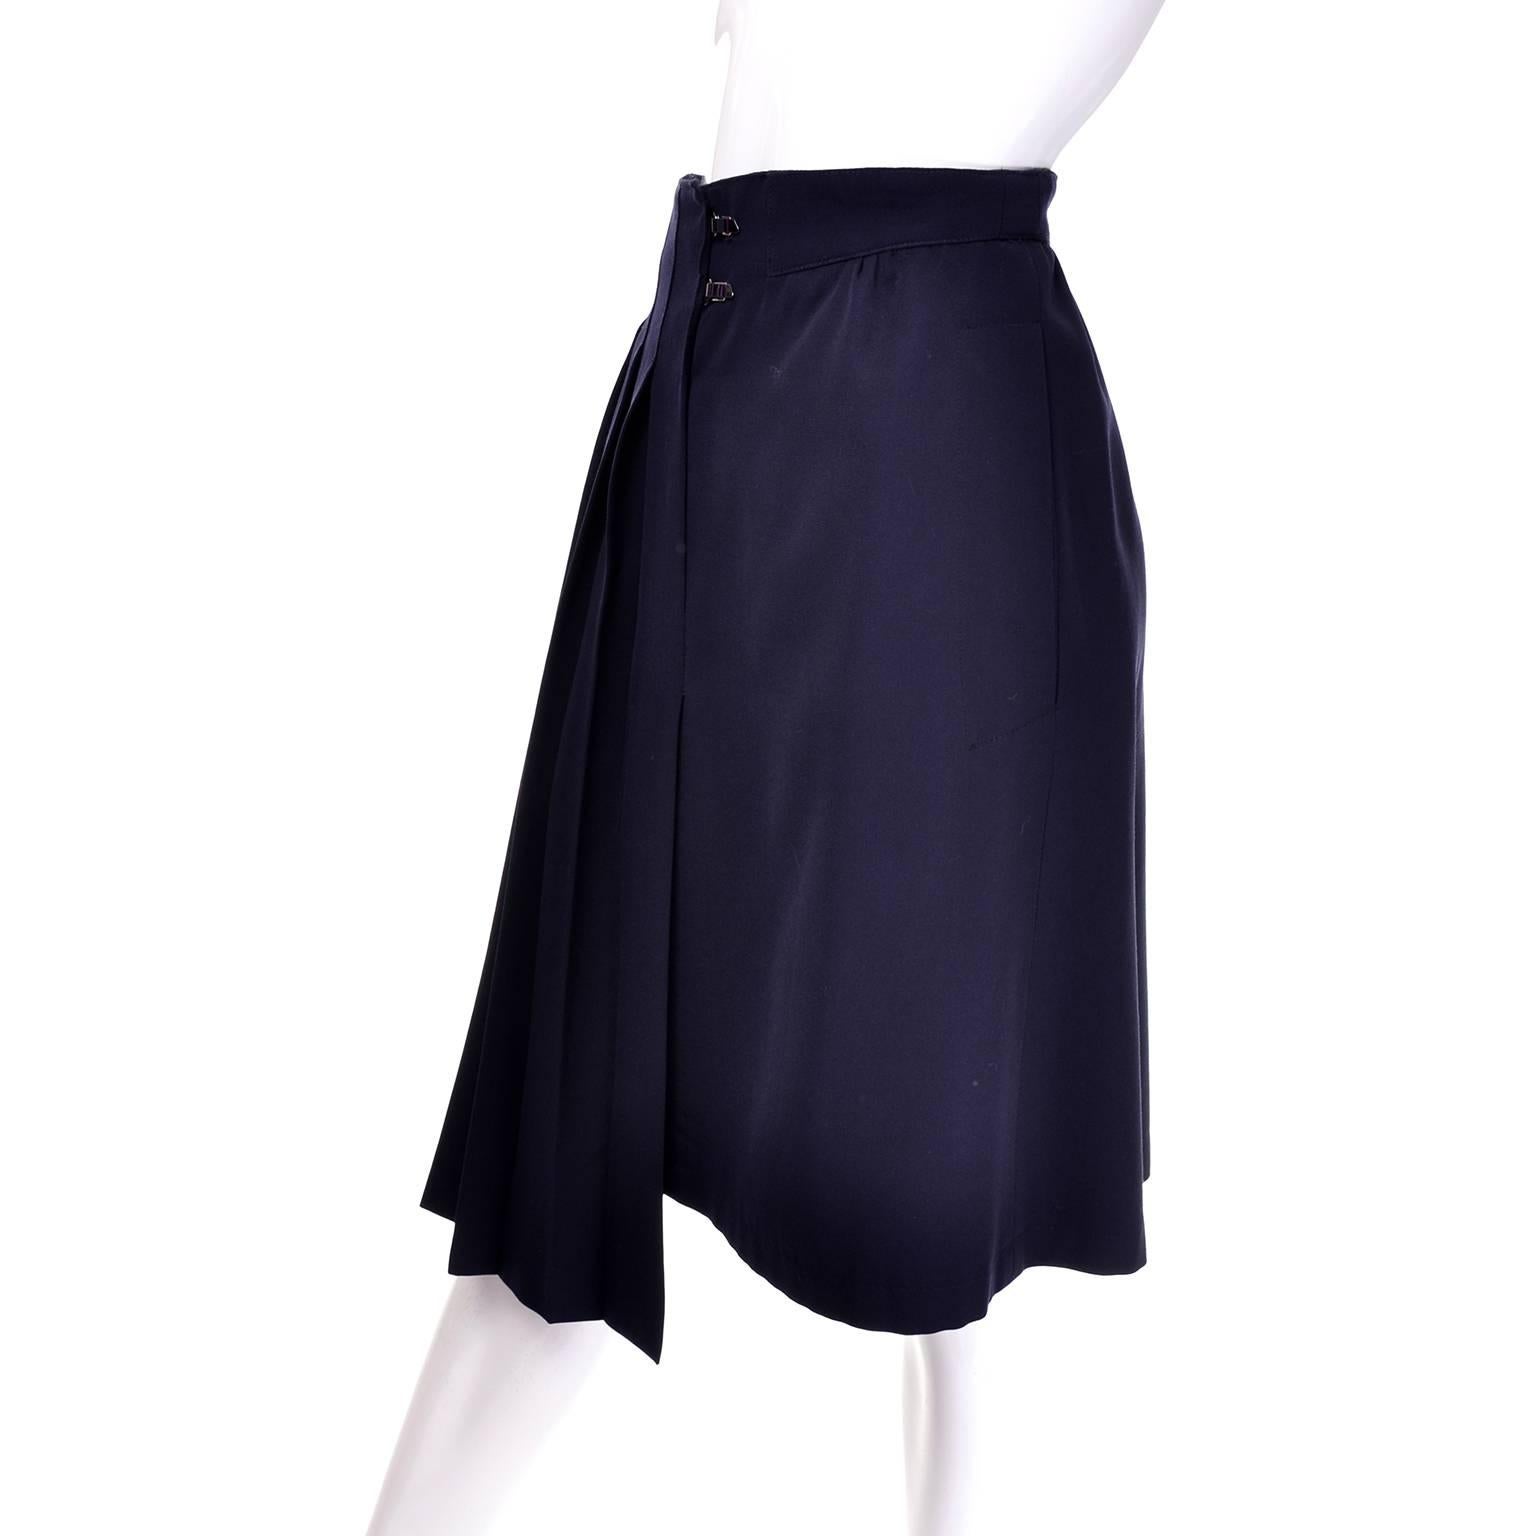 This avant garde, dramatically pleated navy blue skirt was designed by Claude Montana Paris. The skirt wraps in front, securing with two interesting metal toggles, and hangs at an asymmetrical angle just off from center. This skirt has two slit hip